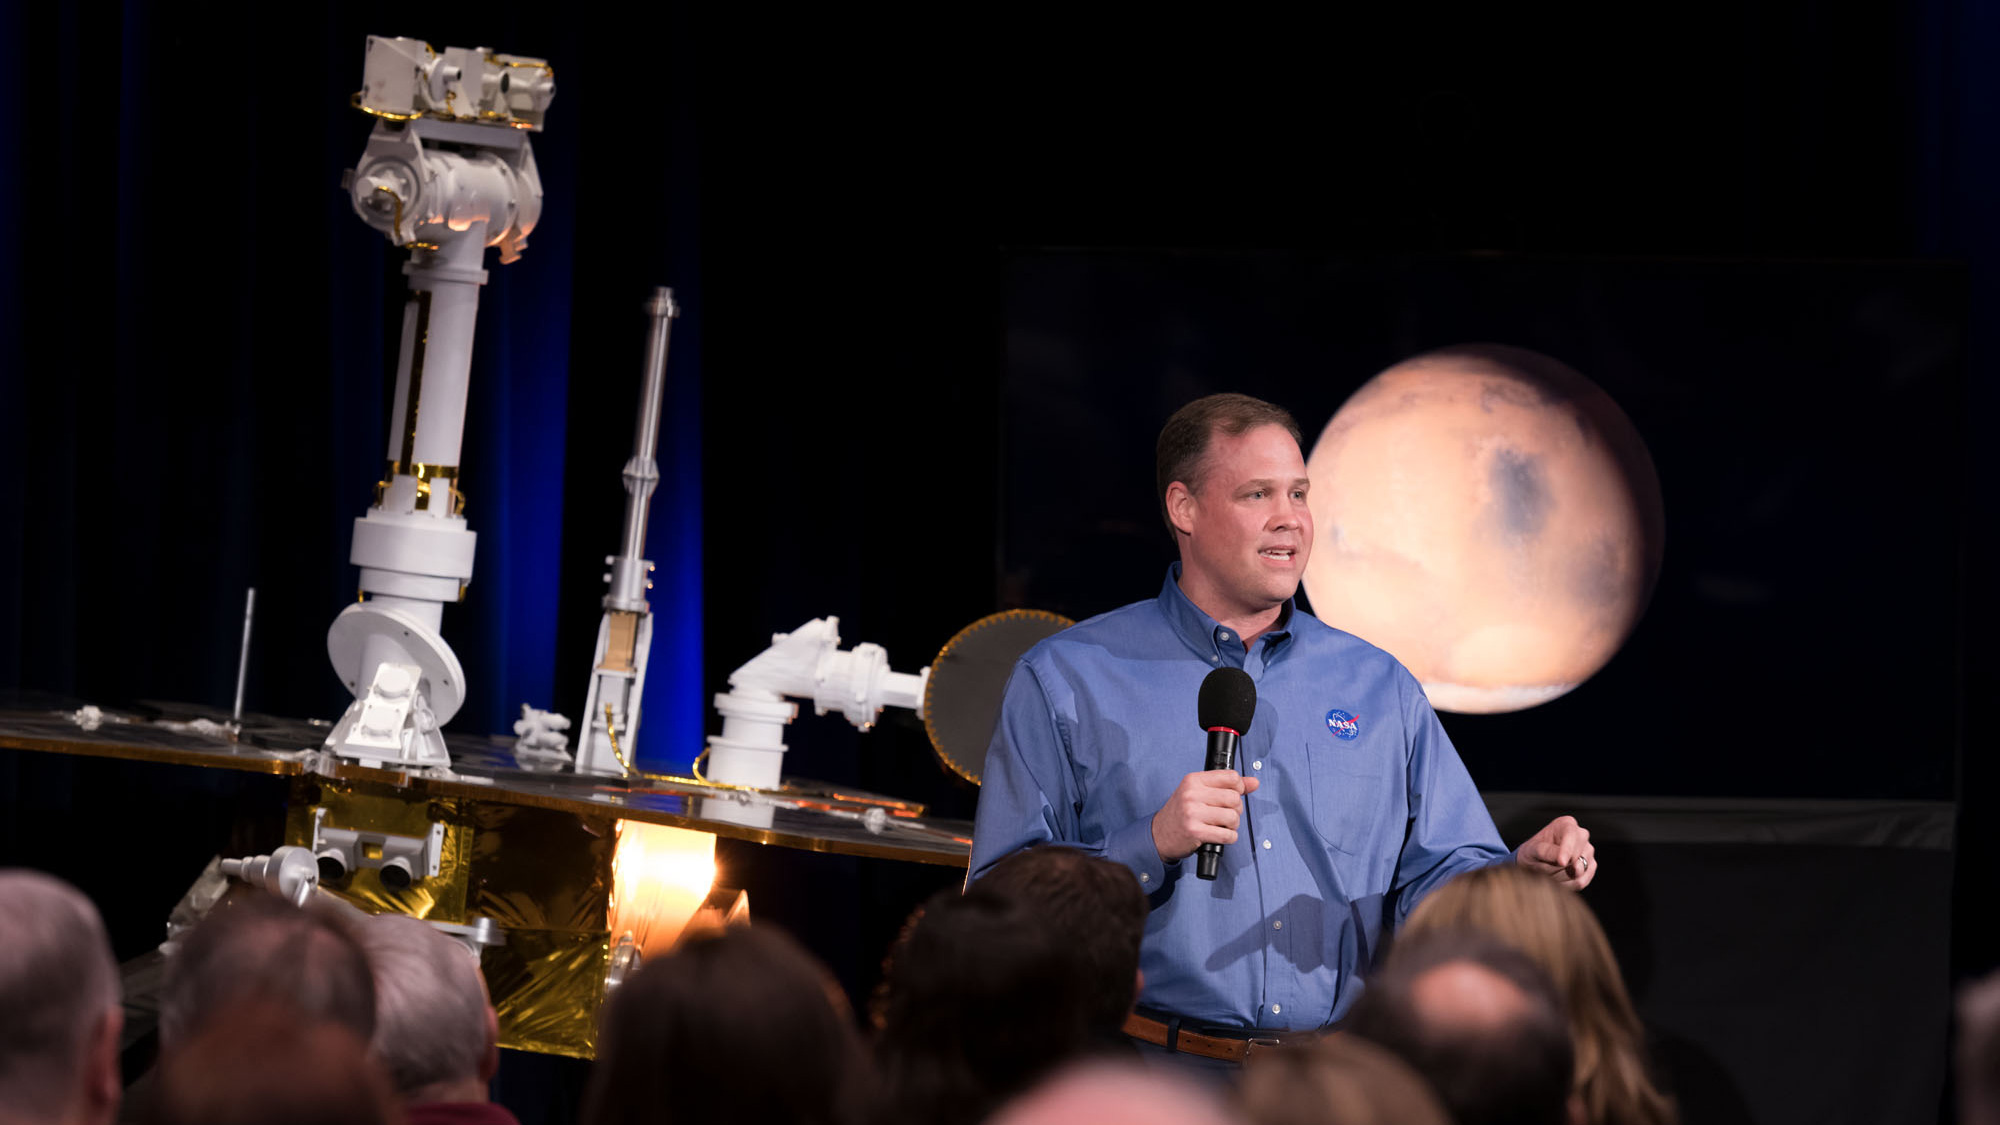 NASA Administrator Jim Bridenstine discusses the successful completion of the Opportunity Mars rover mission during a news briefing at the agency's Jet Propulsion Laboratory in Pasadena, California. Behind him to the left is a model of Opportunity and to the right behind him is an image of Mars.